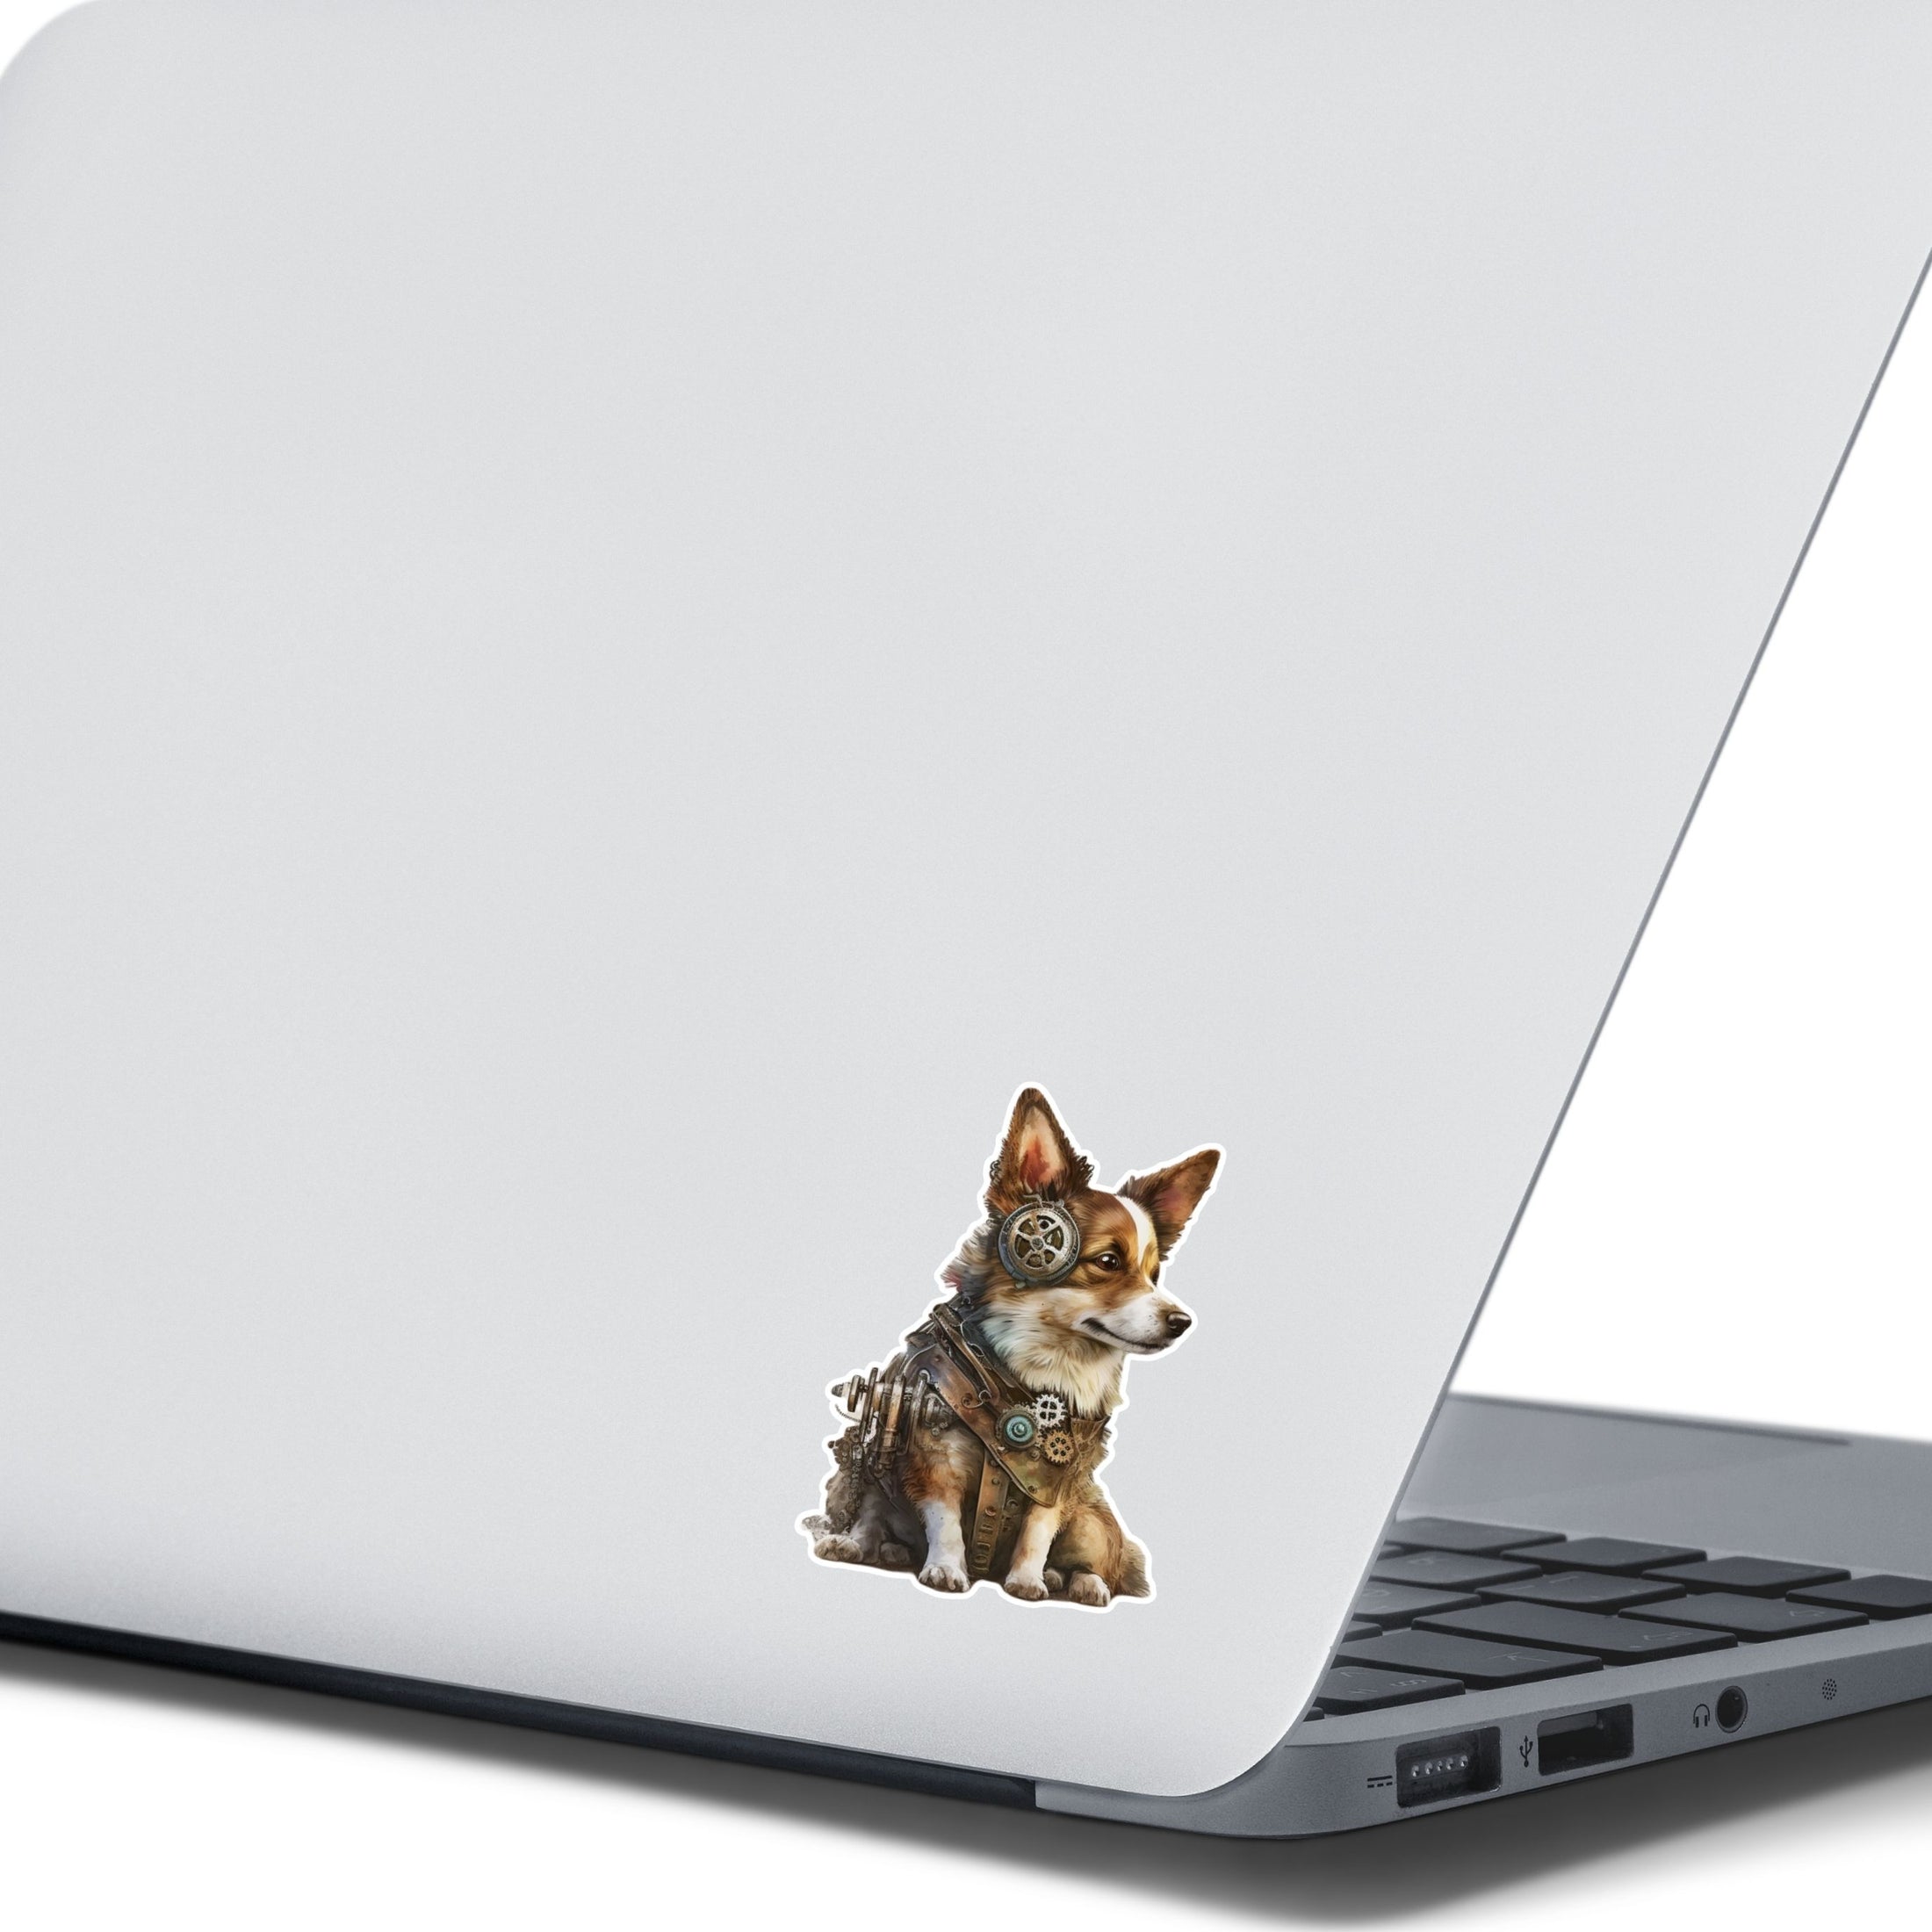 This image shows the steampunk puppy sticker on the back of an open laptop.